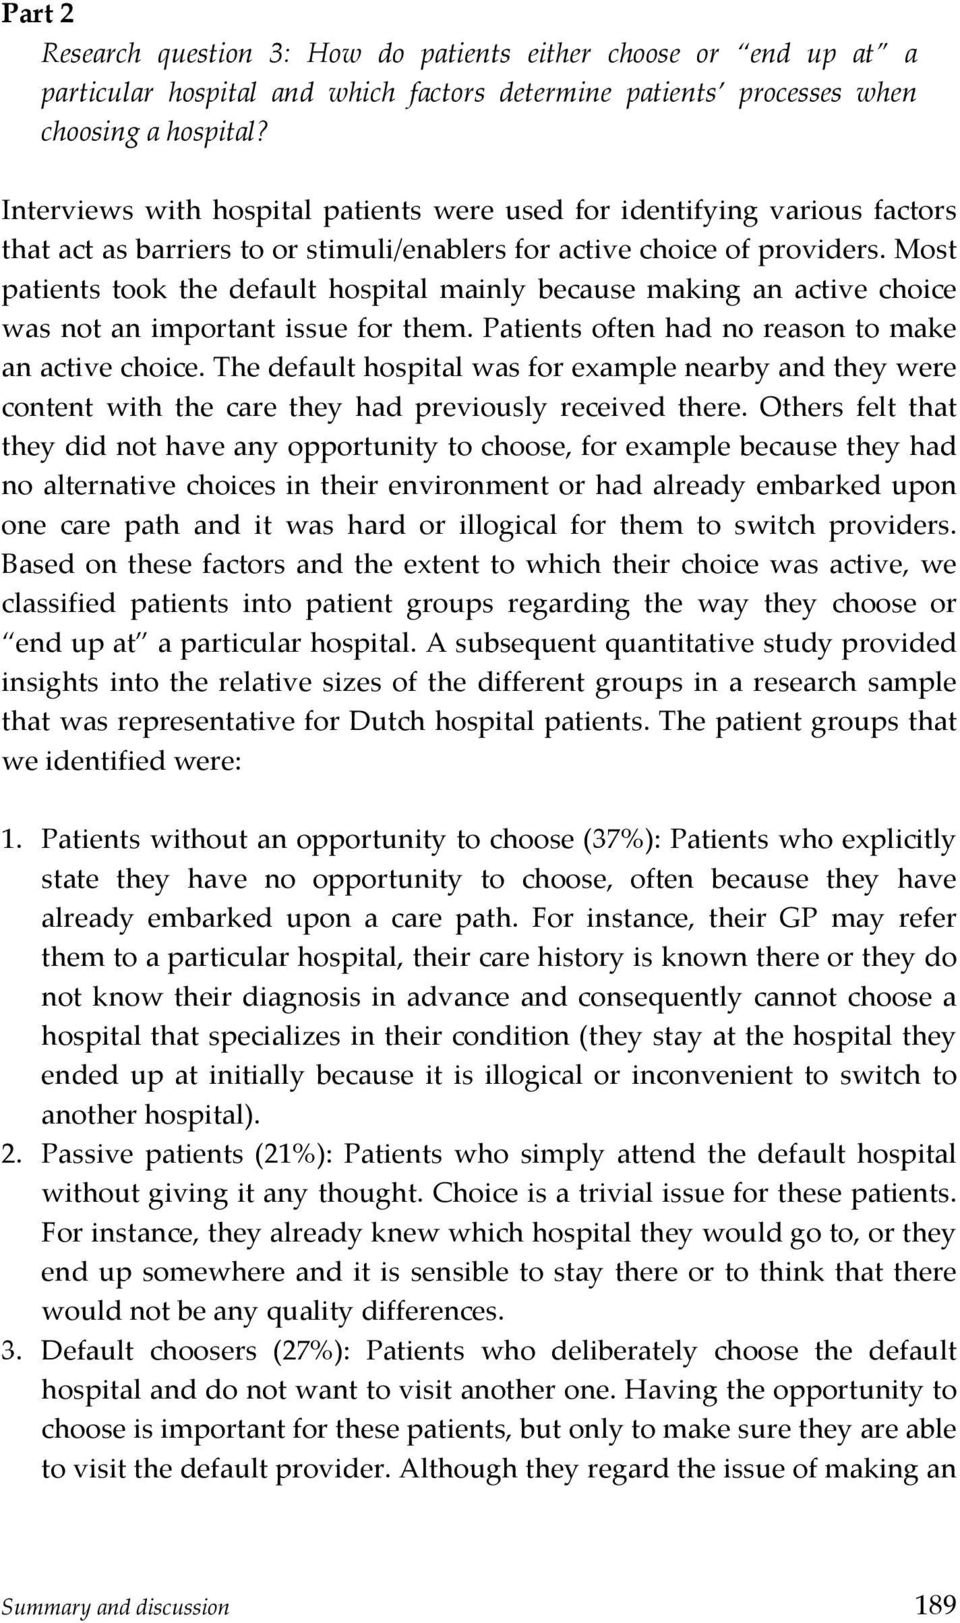 most patients took the default hospital mainly because making an active choice wasnotanimportantissueforthem.patientsoftenhadnoreasontomake anactivechoice.